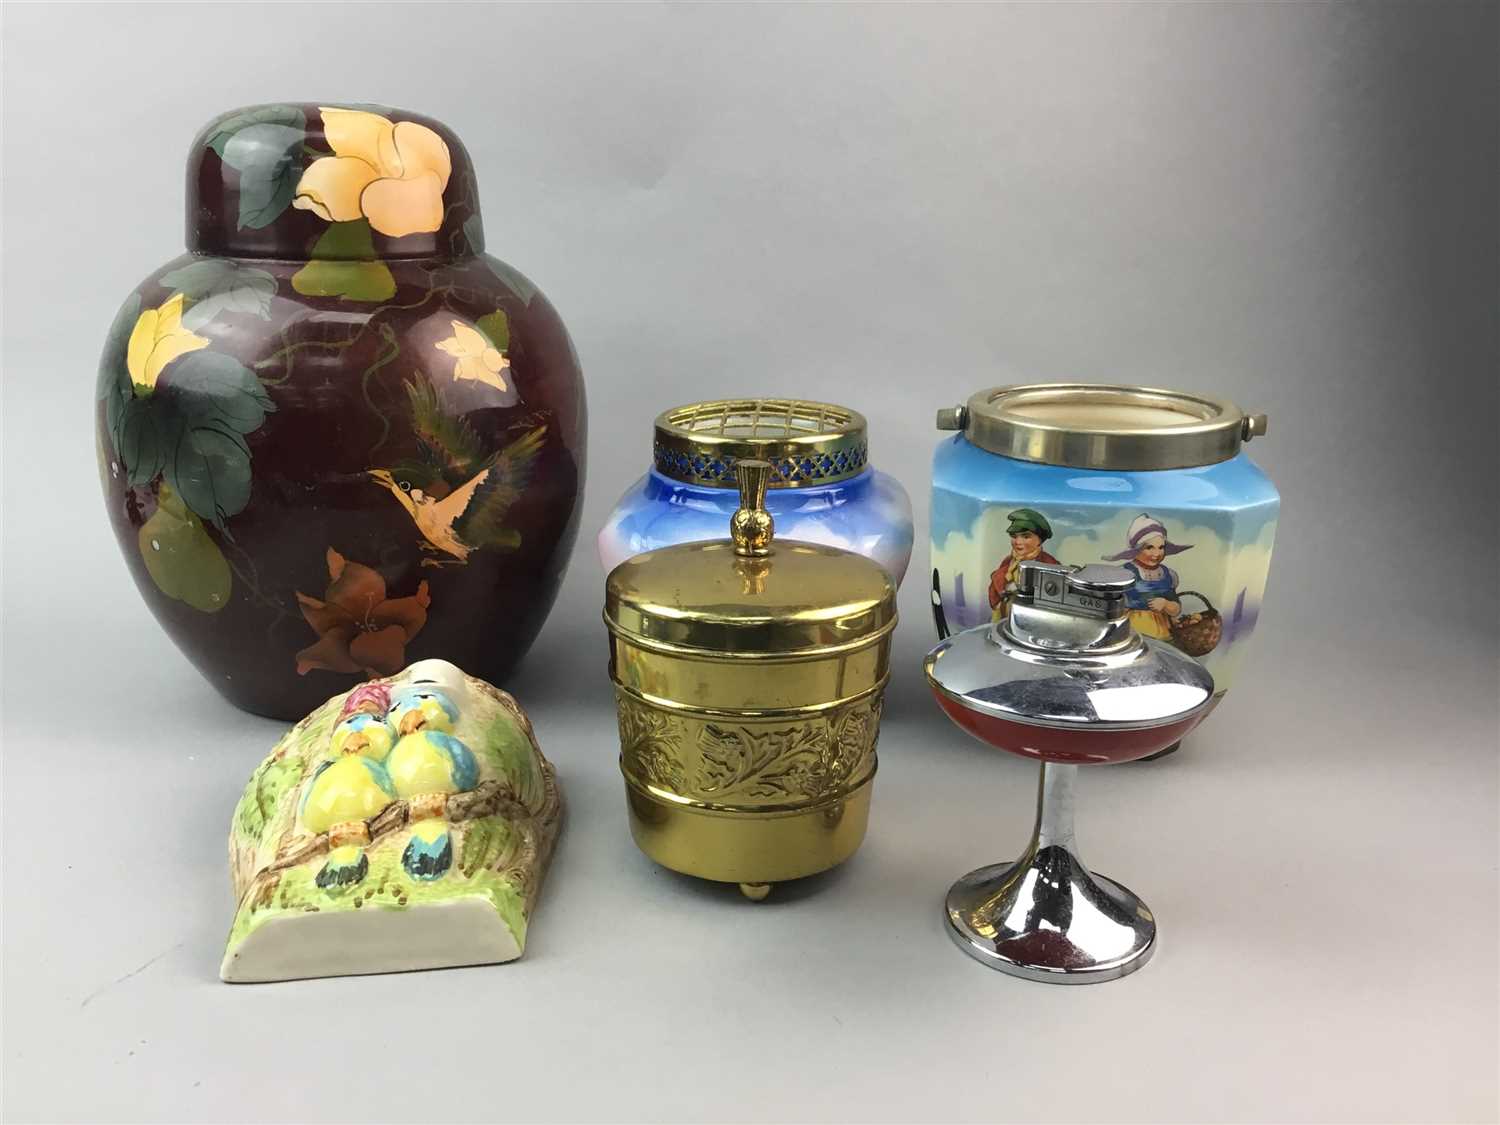 Lot 114 - A CARLTON WARE OVAL COMPORT, MURANO GLASS TABLE LIGHTER AND OTHER CERAMICS